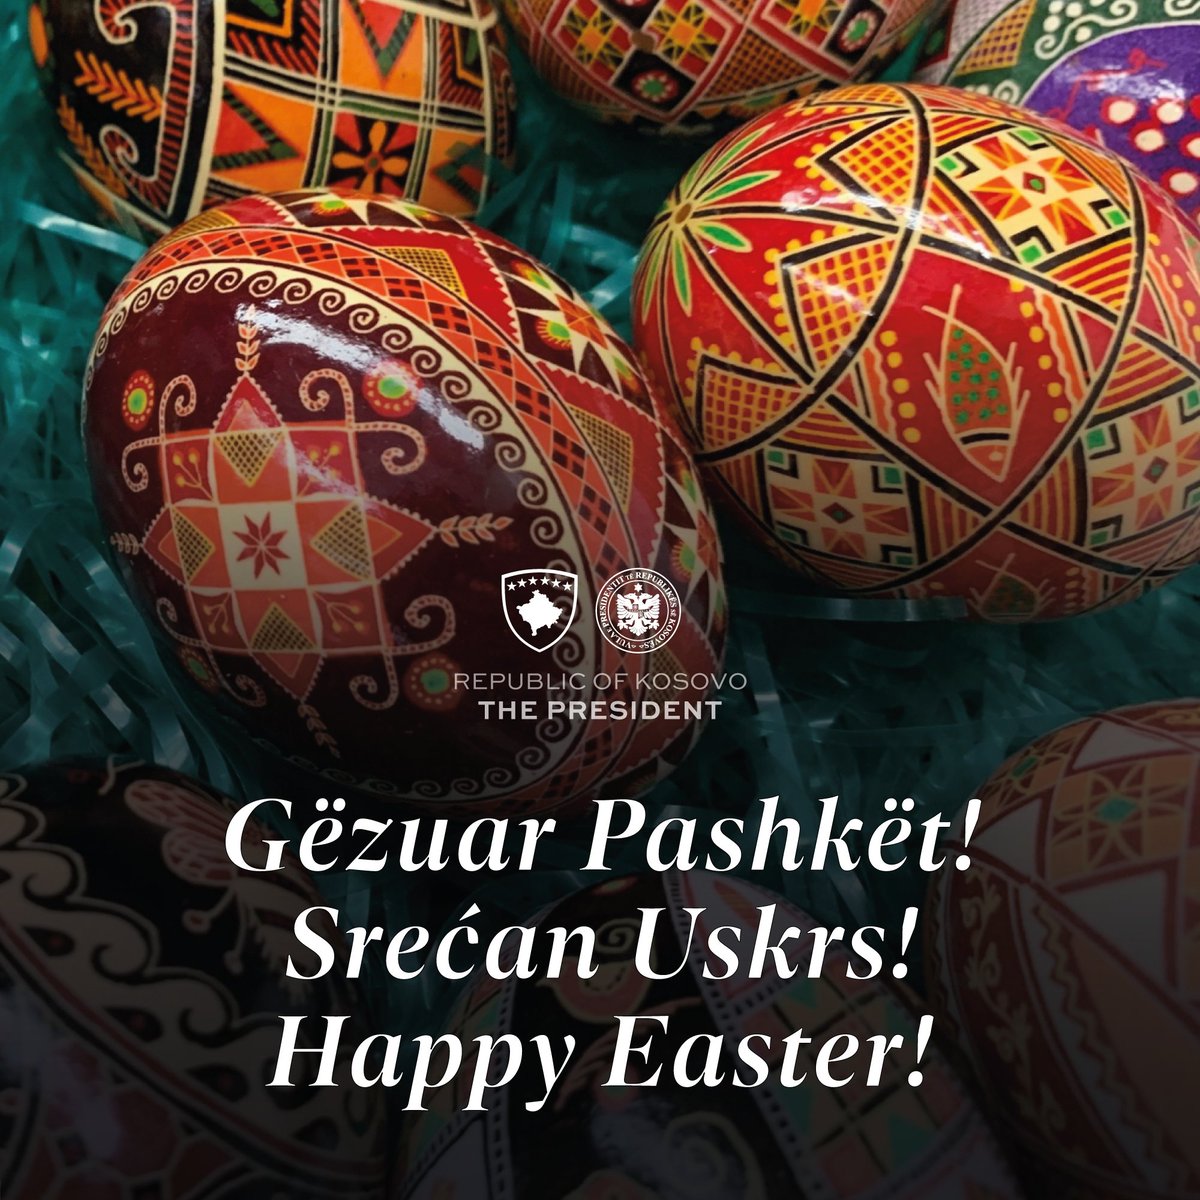 Happy Easter to Orthodox believers in Kosovo and around the world! May this day of resurrection and renewal bring peace and joy to all your families!